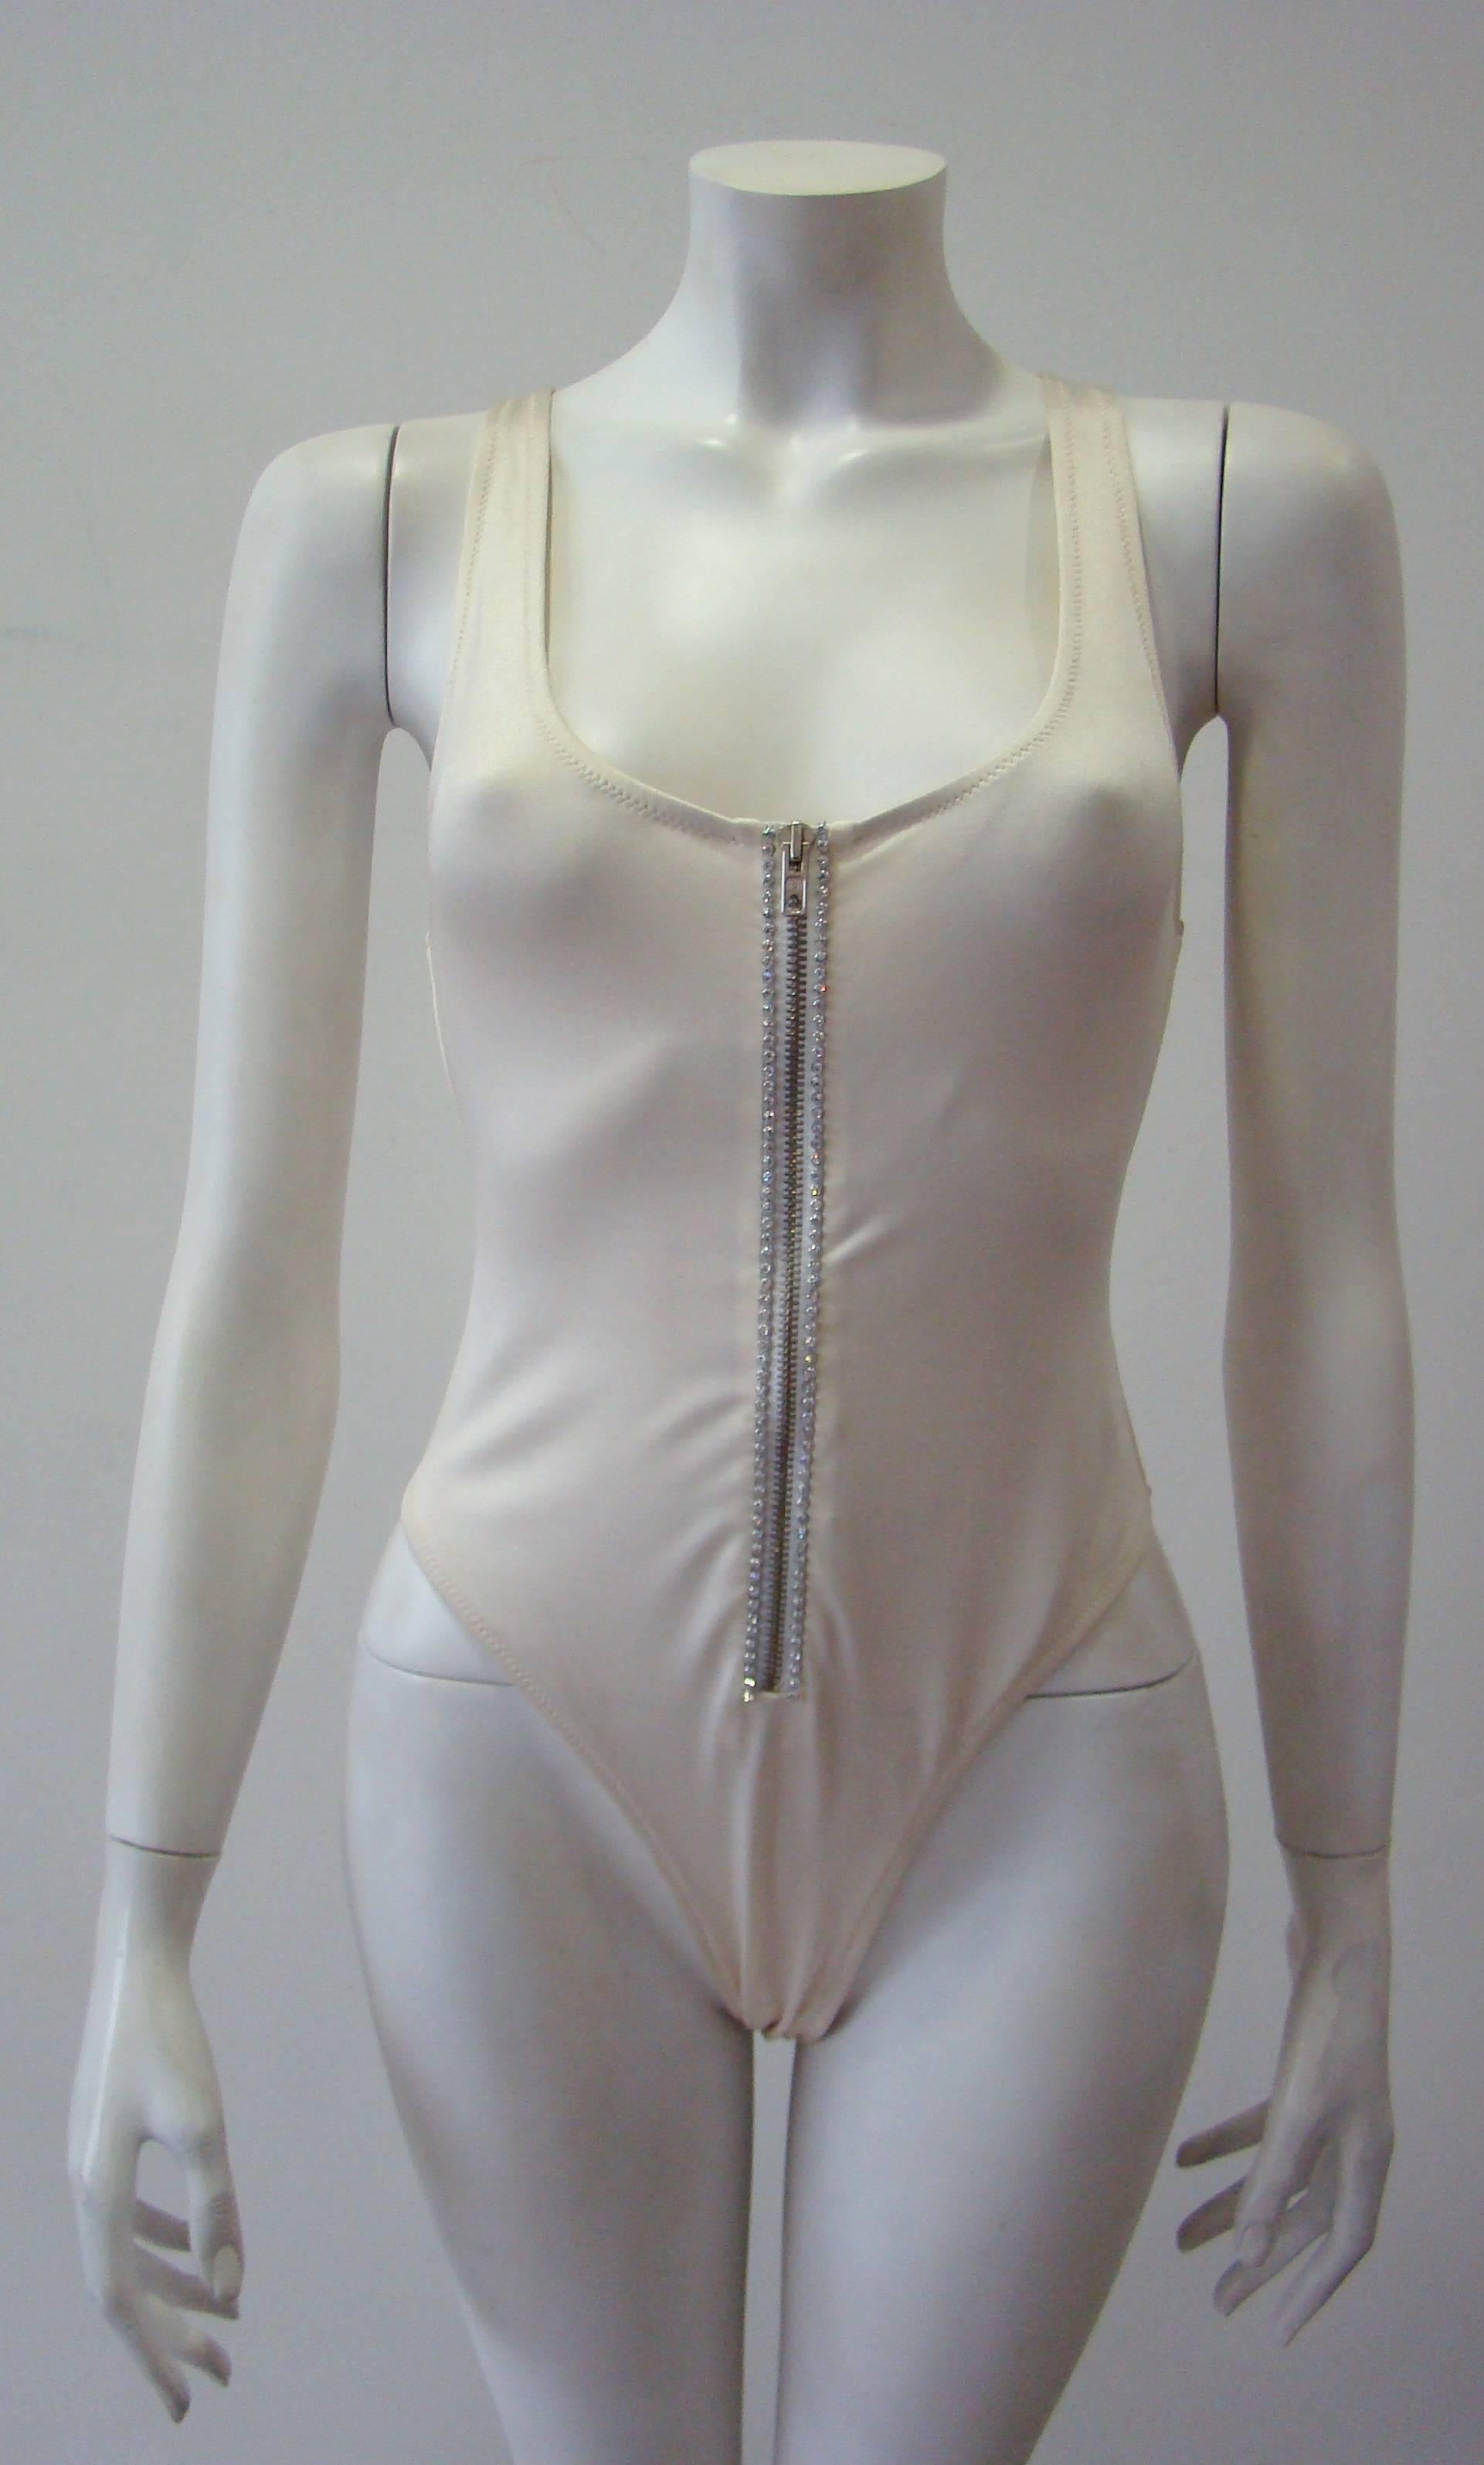 Gianni Versace Mare Stretch White Bathing Suit With Zip Front Detailing Spring 1996